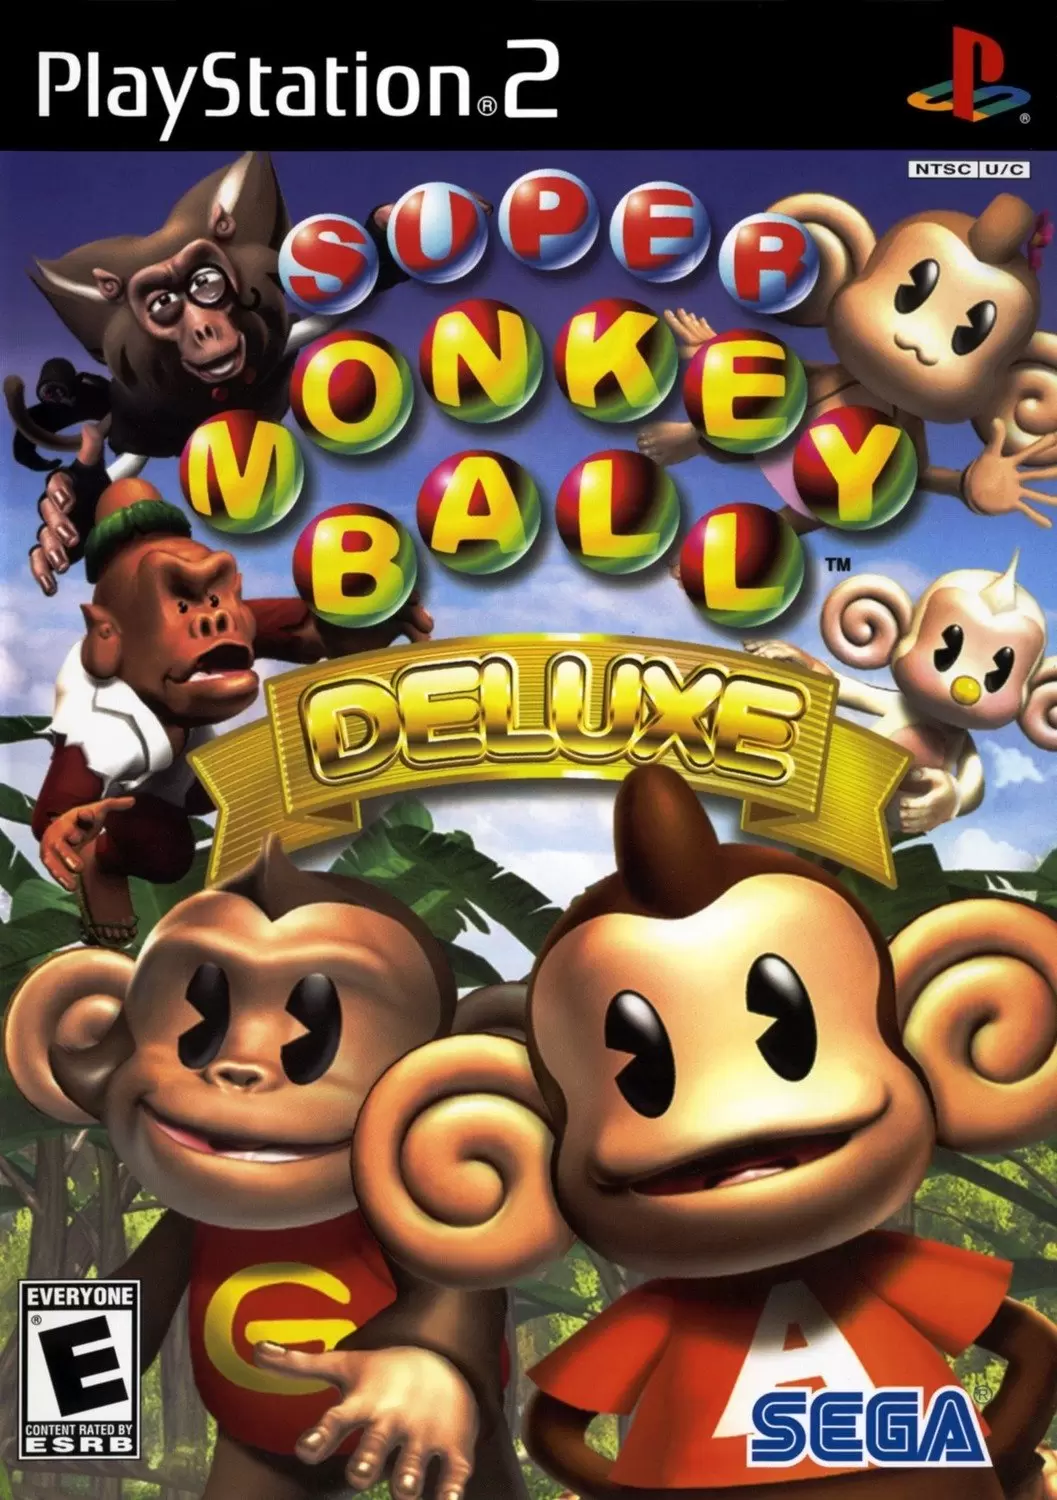 PS2 Games - Super Monkey Ball Deluxe